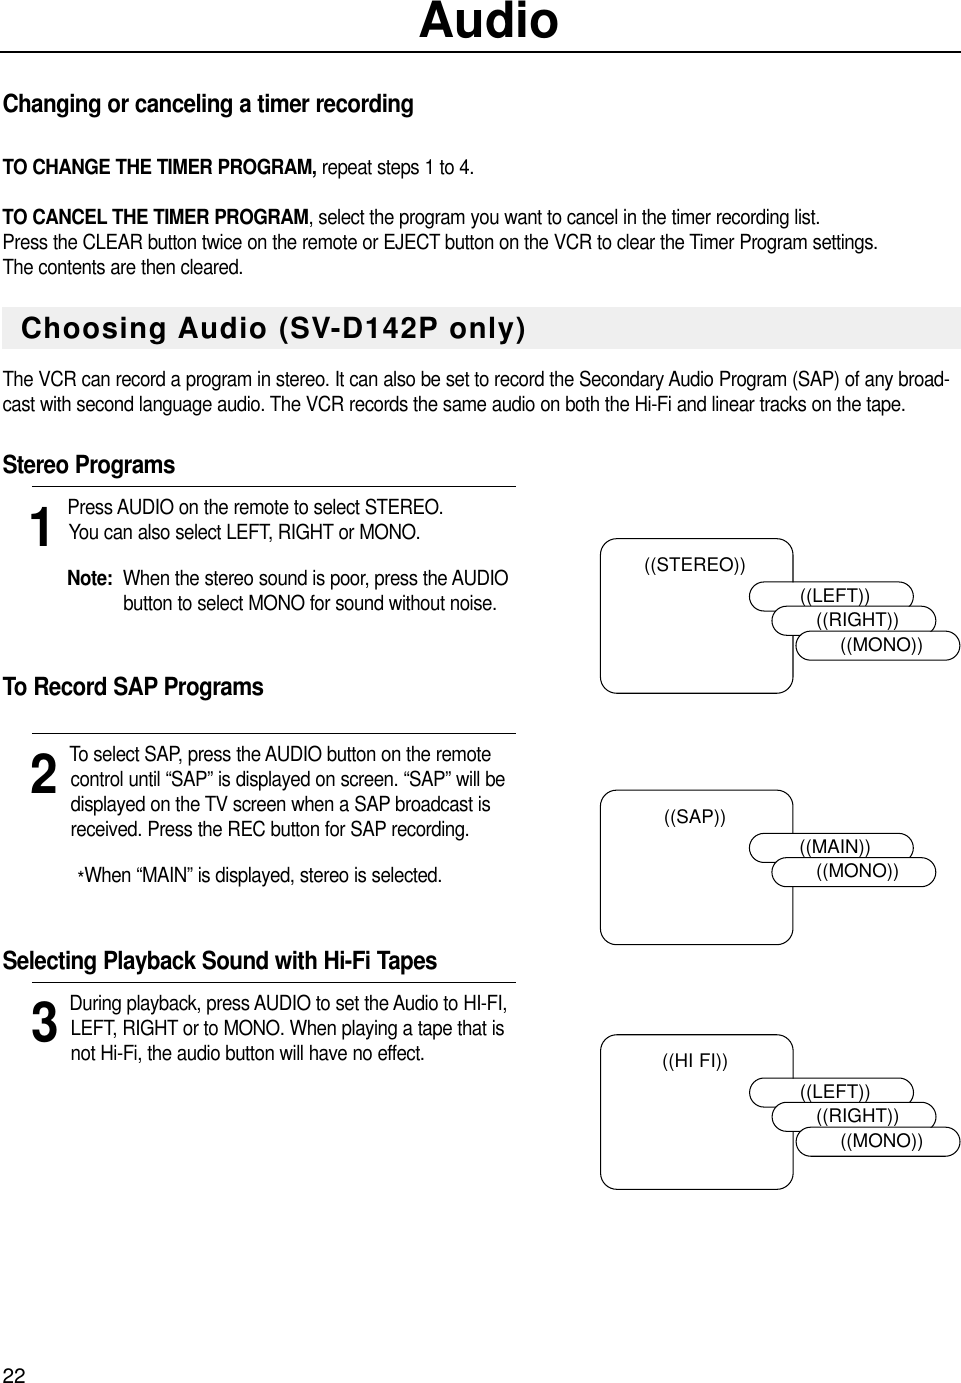 22AudioChanging or canceling a timer recordingTO CHANGE THE TIMER PROGRAM, repeat steps 1 to 4.TO CANCEL THE TIMER PROGRAM, select the program you want to cancel in the timer recording list. Press the CLEAR button twice on the remote or EJECT button on the VCR to clear the Timer Program settings.The contents are then cleared. The VCR can record a program in stereo. It can also be set to record the Secondary Audio Program (SAP) of any broad-cast with second language audio. The VCR records the same audio on both the Hi-Fi and linear tracks on the tape.Stereo Programs1Press AUDIO on the remote to select STEREO. You can also select LEFT, RIGHT or MONO. Note:  When the stereo sound is poor, press the AUDIO  button to select MONO for sound without noise. To Record SAP Programs2To select SAP, press the AUDIO button on the remotecontrol until “SAP” is displayed on screen. “SAP” will bedisplayed on the TV screen when a SAP broadcast isreceived. Press the REC button for SAP recording.*When “MAIN” is displayed, stereo is selected.Selecting Playback Sound with Hi-Fi Tapes3During playback, press AUDIO to set the Audio to HI-FI,LEFT, RIGHT or to MONO. When playing a tape that isnot Hi-Fi, the audio button will have no effect.  ((STEREO))Choosing Audio (SV-D142P only)((LEFT))((RIGHT))((MONO))((SAP))((MAIN))((MONO))((HI FI))((LEFT))((RIGHT))((MONO))